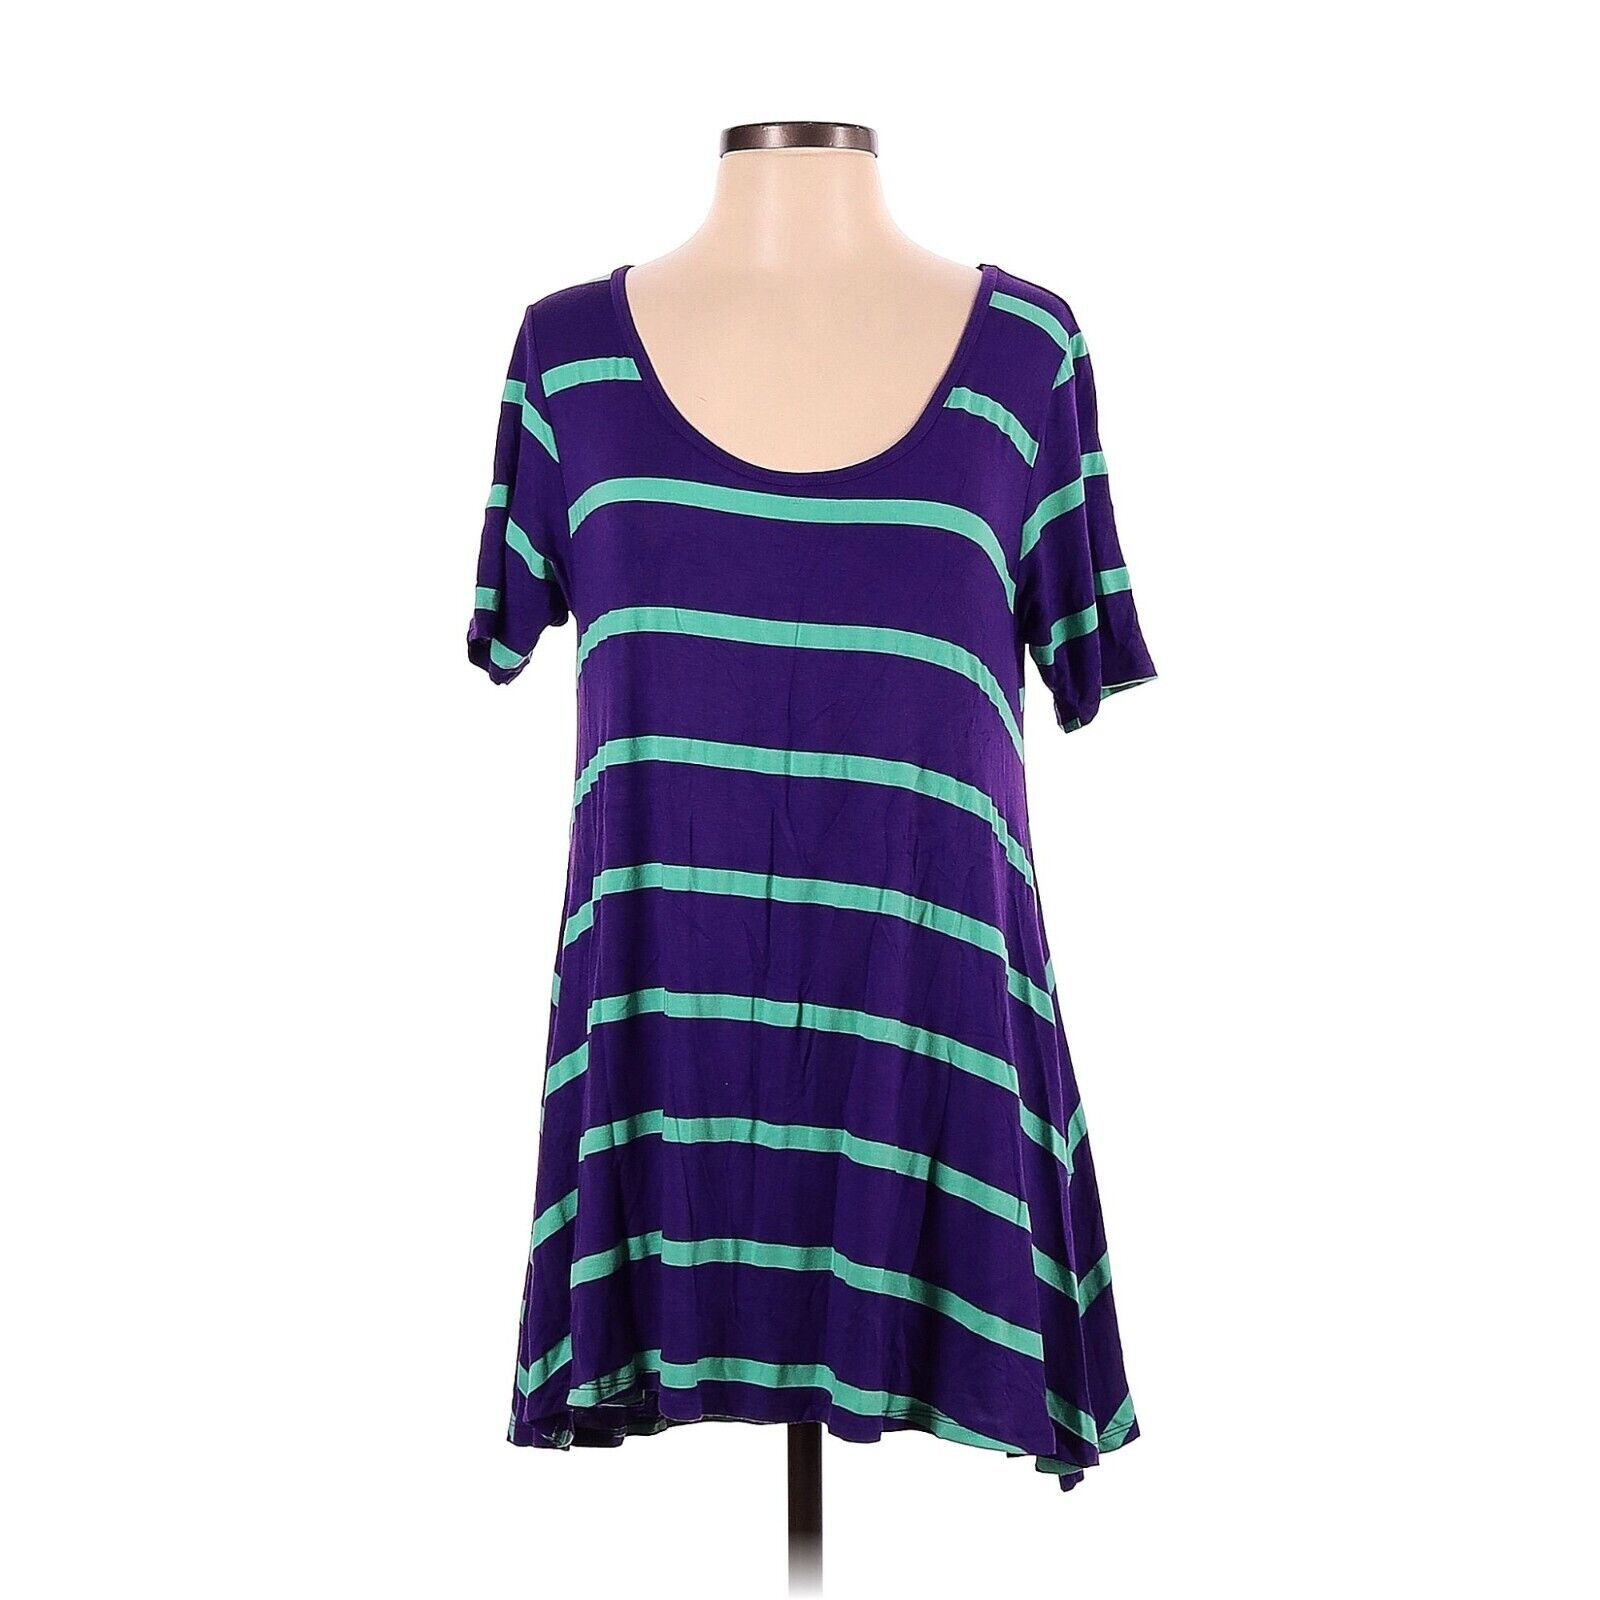 Primary image for LuLaRoe LLR Purple & Teal Stripe Women's Oversize Perfect Tee Tunic Top XS